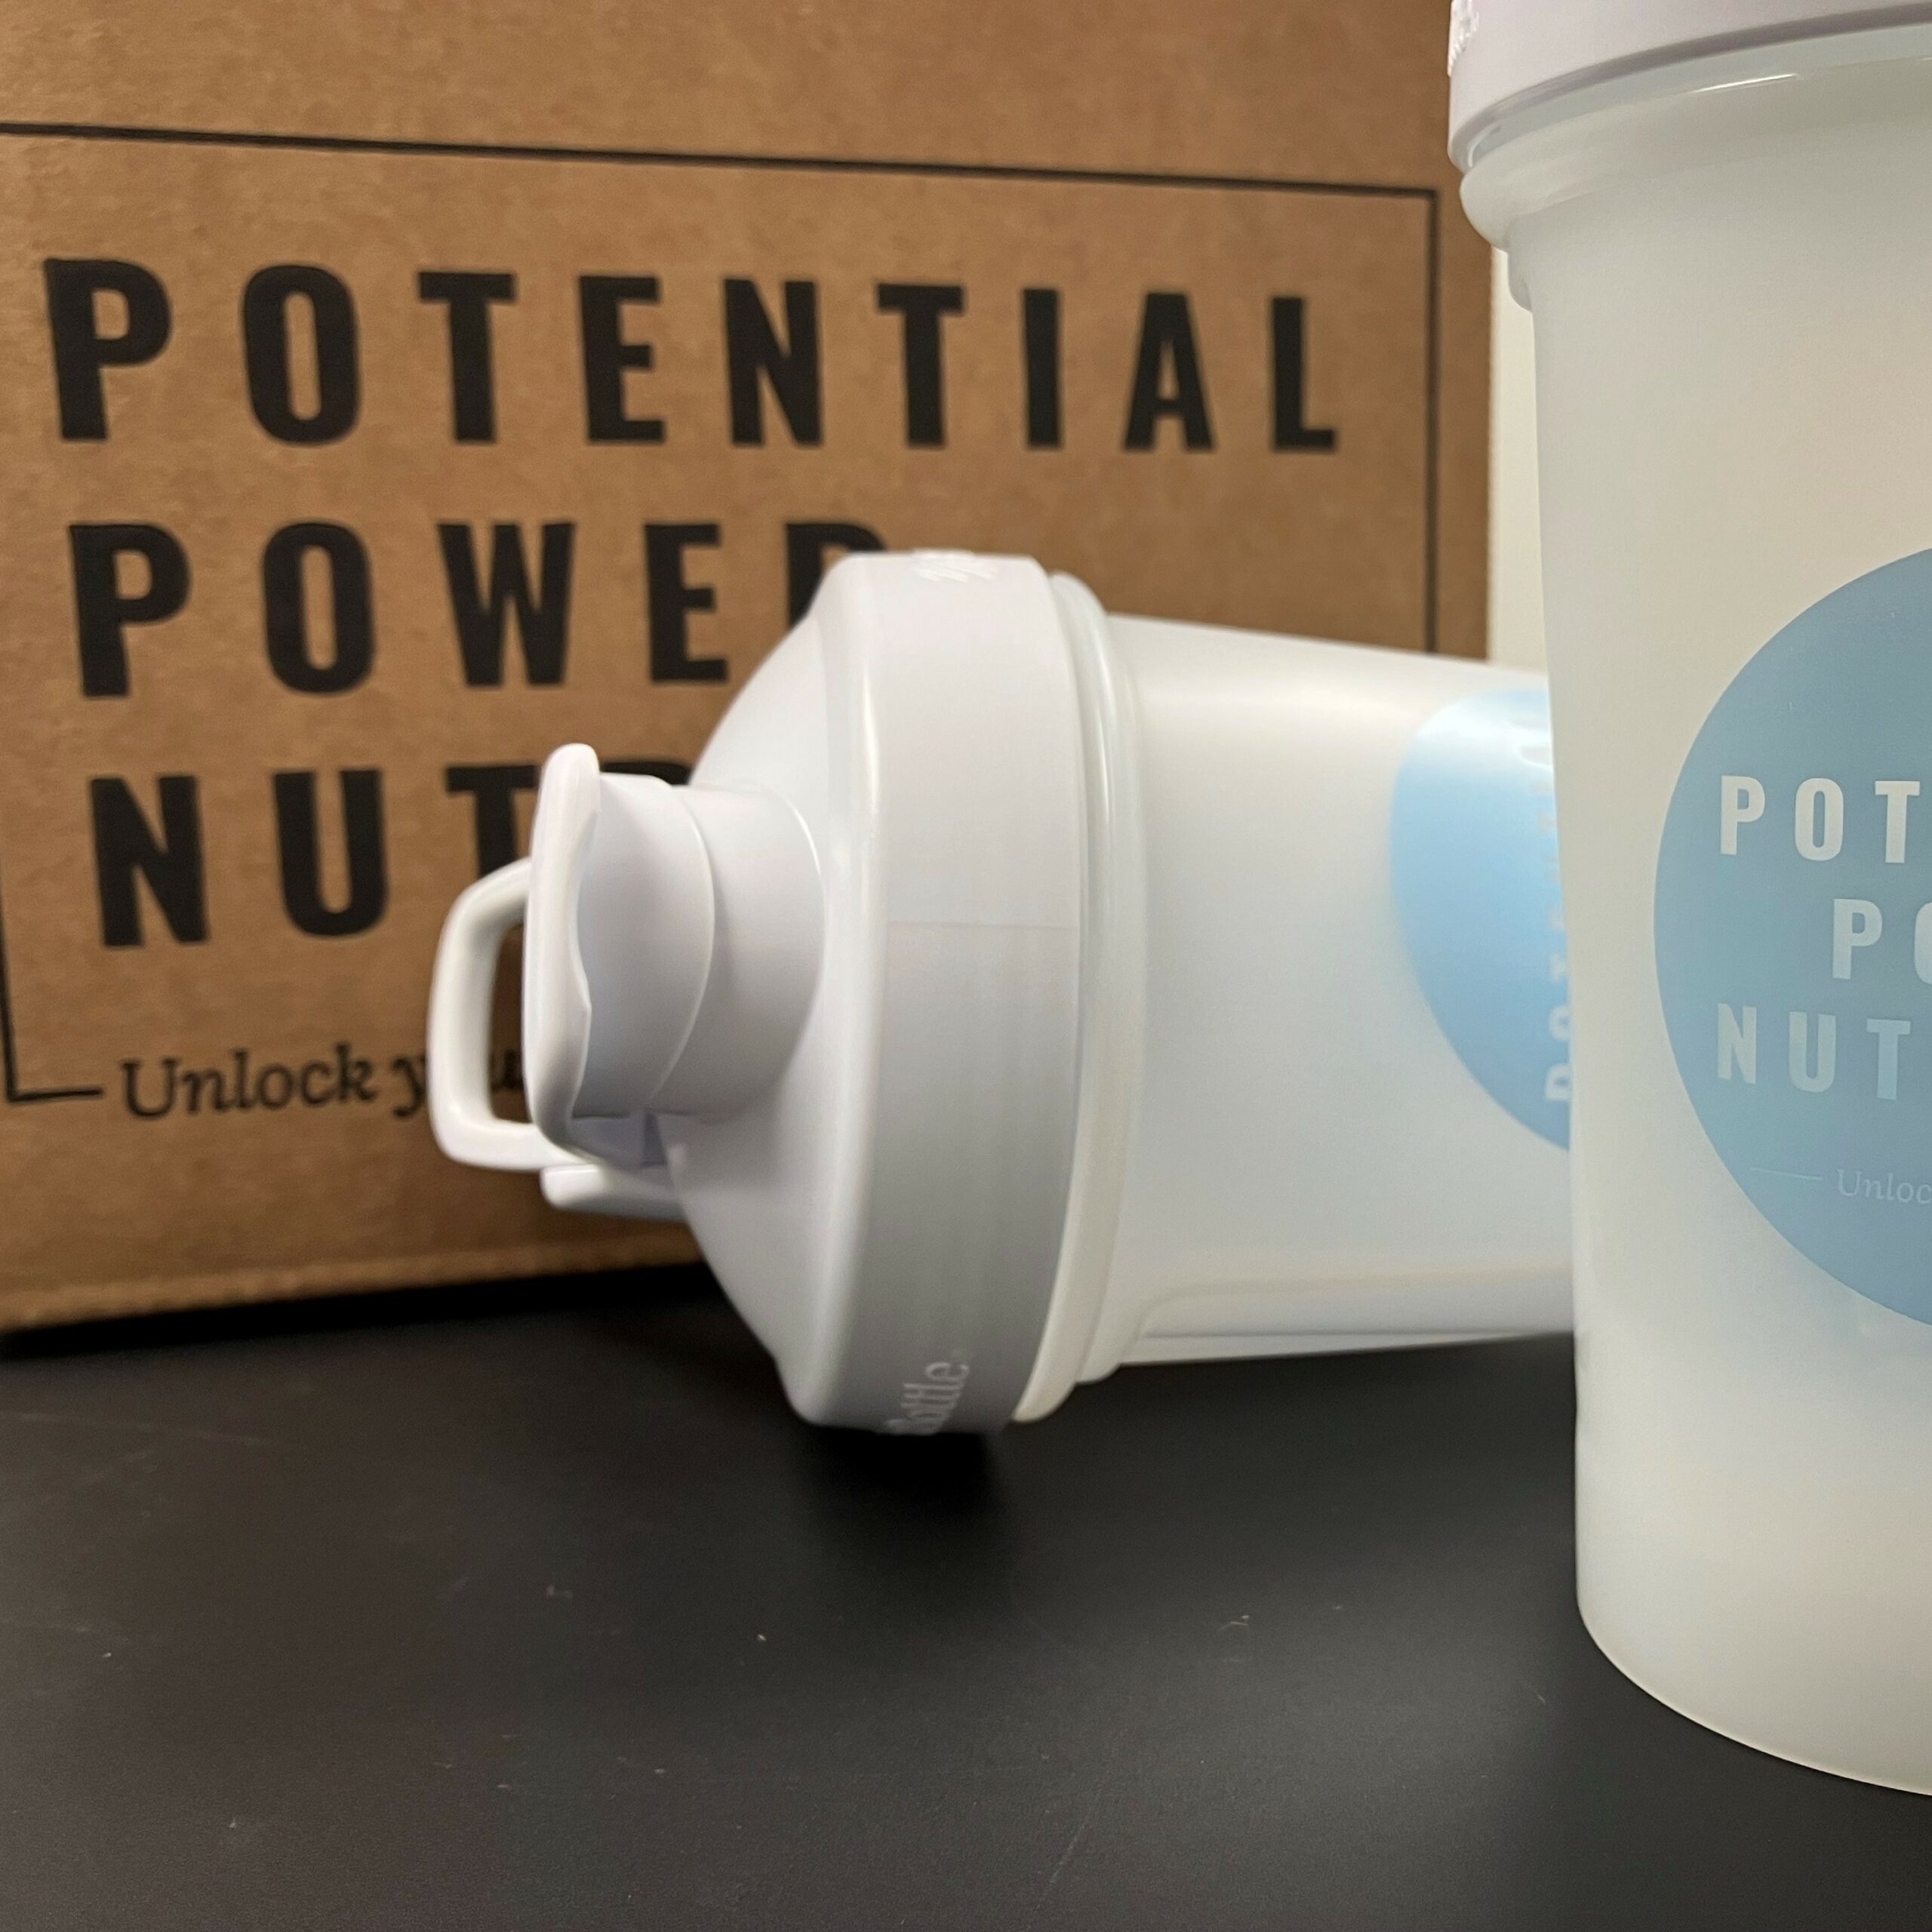 https://www.potentialpowernutrition.com/wp-content/uploads/2022/02/2-Cnt-with-2-shakers-up-front-scaled.jpg